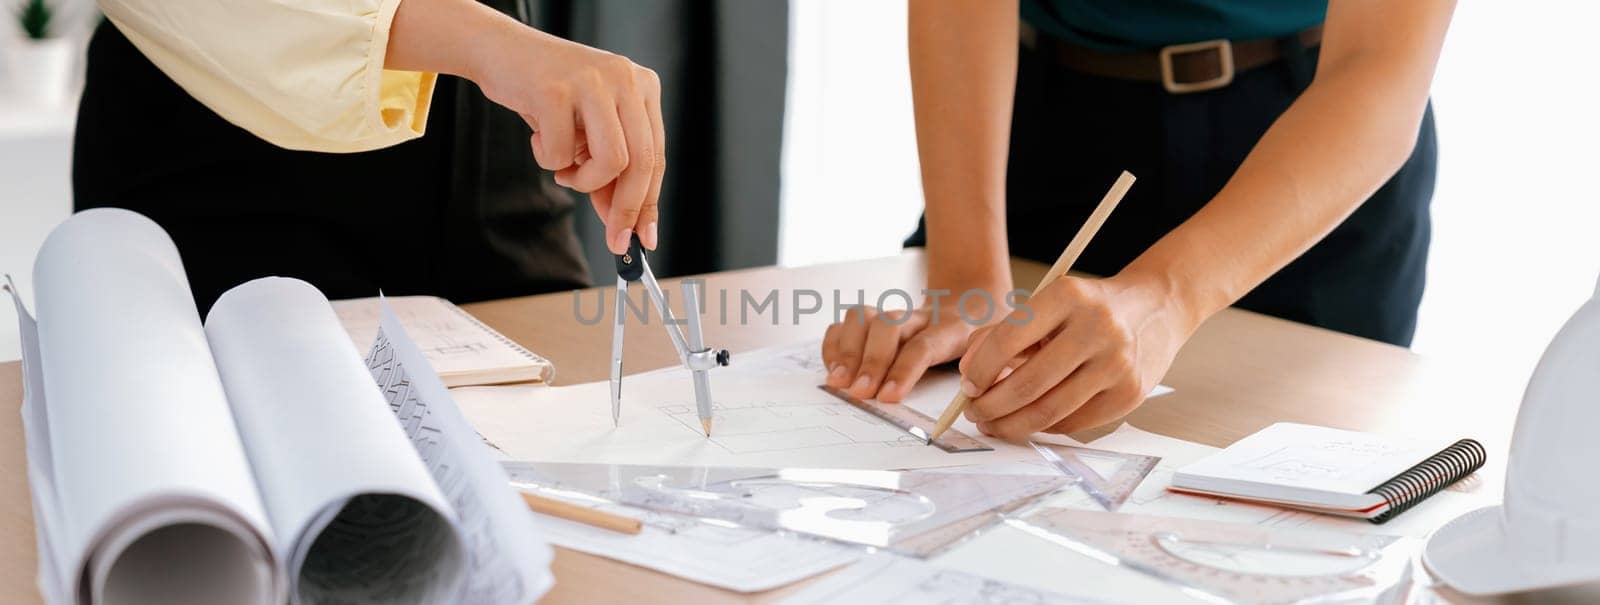 Professional architect team used divider measure during draft blueprint on table with architectural document, safety helmet and blueprint scatter around. Closeup. Focus on hand. Delineation.